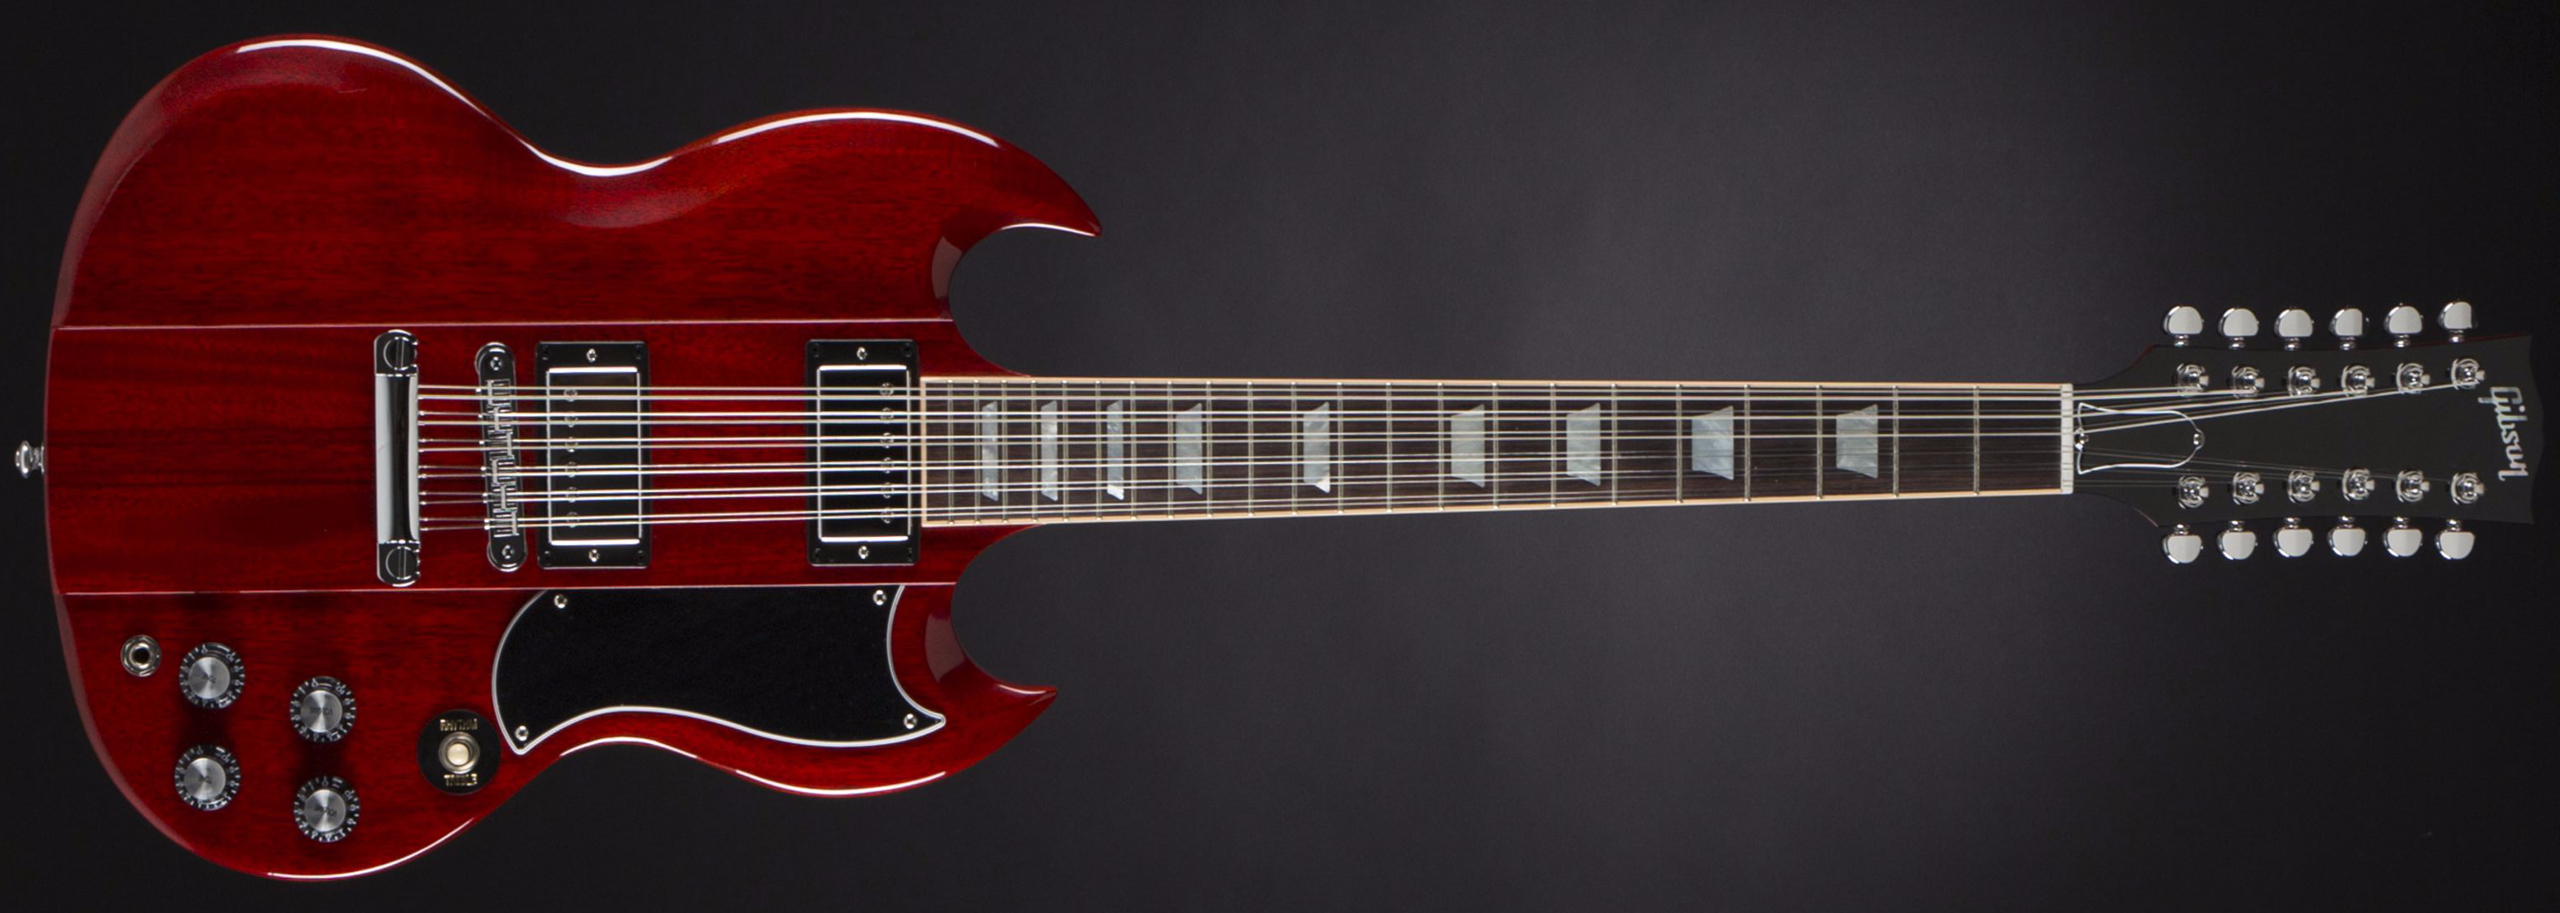 Gibson SG 12-String Neck-Through Limited Heritage Cherry | MUSIC STORE  professional